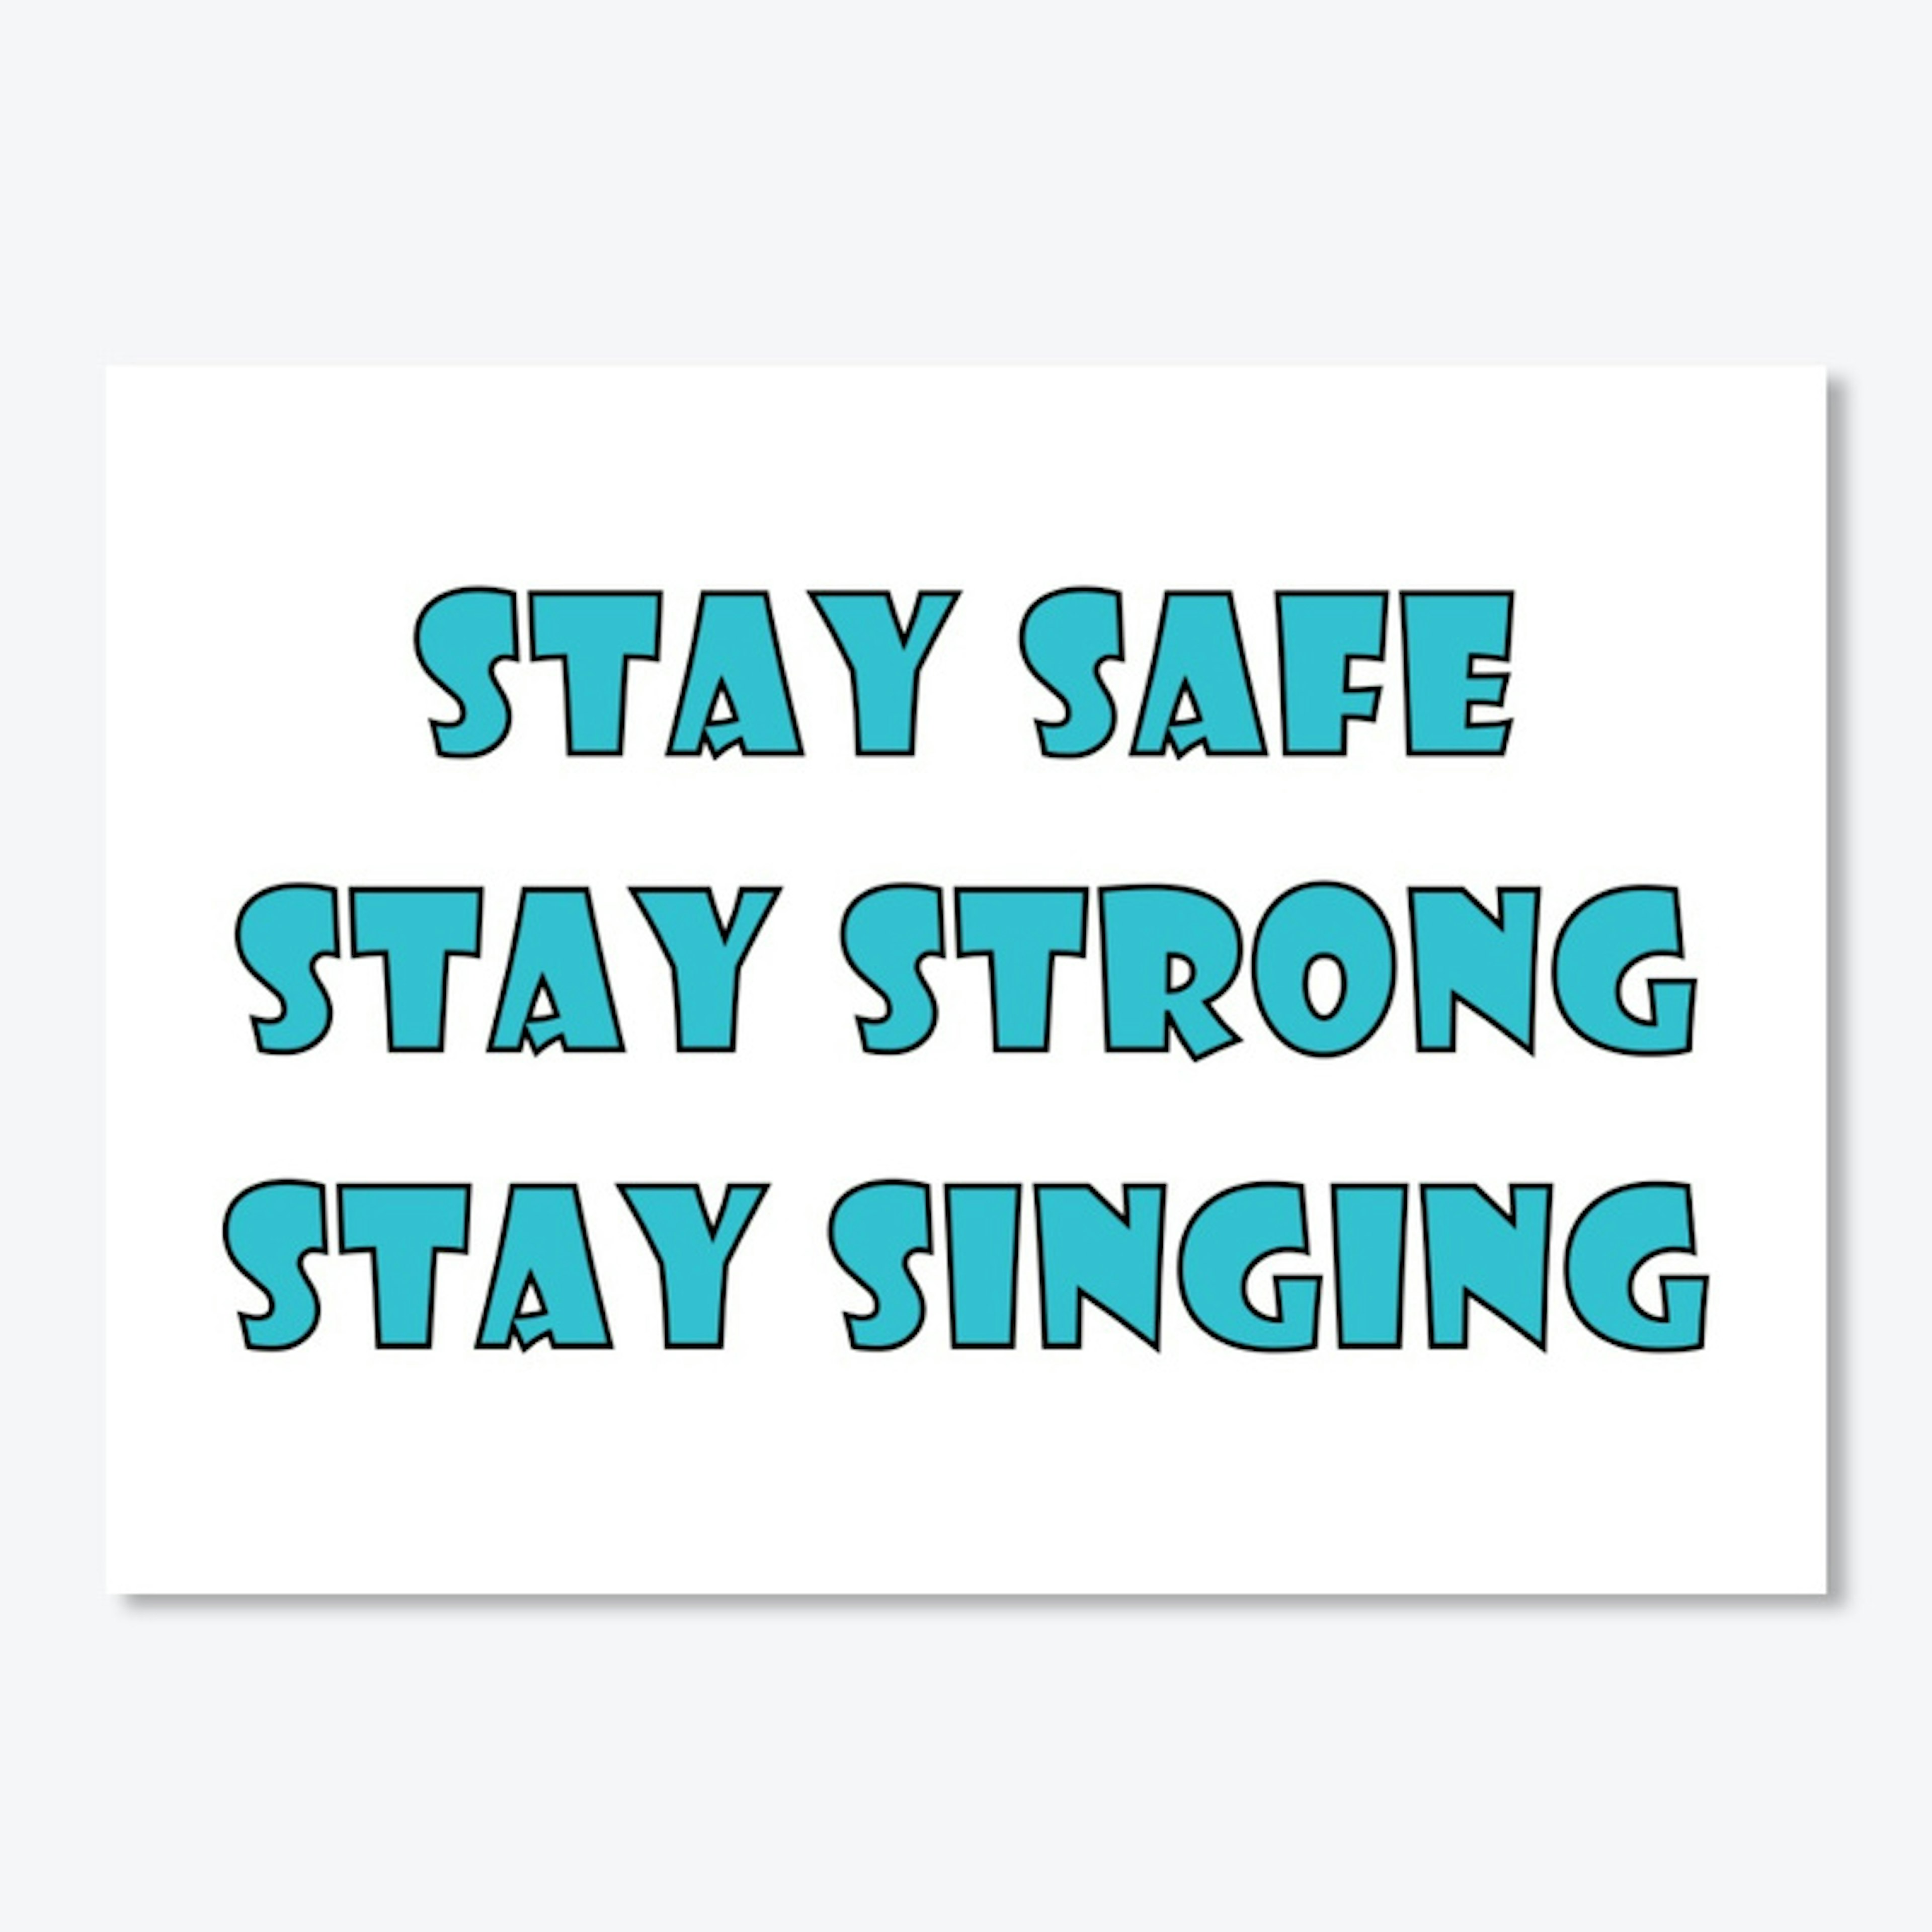 Stay Safe, Stay Strong, Stay Singing